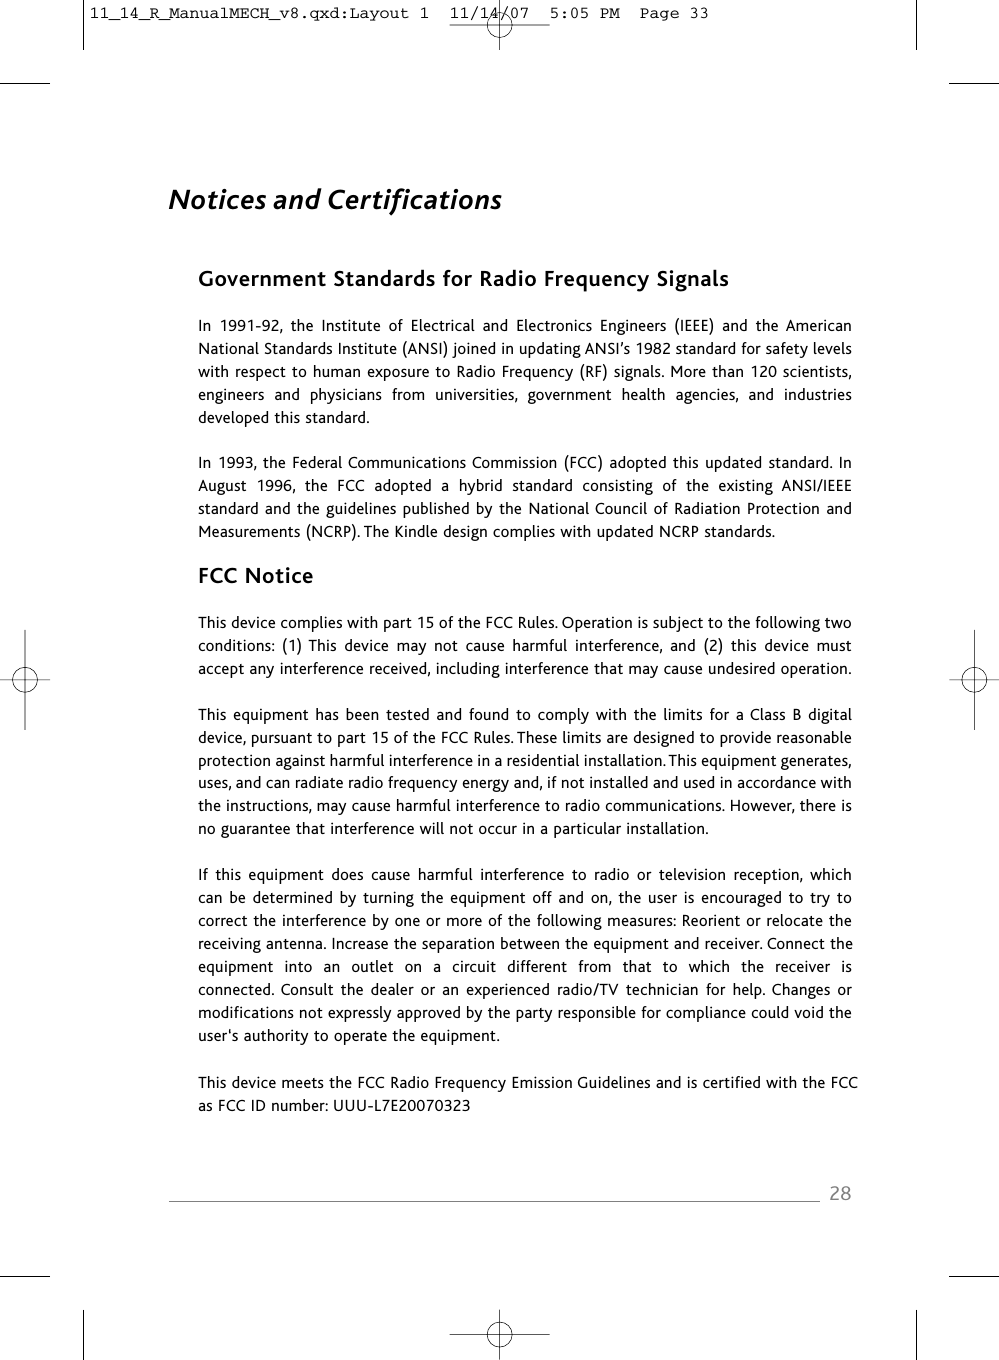 Notices and CertificationsGovernment Standards for Radio Frequency SignalsIn  1991-92,  the  Institute  of  Electrical  and  Electronics  Engineers  (IEEE)  and  the  AmericanNational Standards Institute (ANSI) joined in updating ANSI’s 1982 standard for safety levelswith respect to human exposure to Radio Frequency (RF) signals. More than 120 scientists,engineers  and  physicians  from  universities,  government  health  agencies,  and  industries developed this standard.In 1993, the Federal Communications Commission (FCC) adopted this updated standard. InAugust  1996,  the  FCC  adopted  a  hybrid  standard  consisting  of  the  existing  ANSI/IEEEstandard and the guidelines published by the National Council of Radiation Protection andMeasurements (NCRP). The Kindle design complies with updated NCRP standards.FCC NoticeThis device complies with part 15 of the FCC Rules. Operation is subject to the following two conditions:  (1) This  device  may  not  cause  harmful  interference,  and  (2)  this  device  must accept any interference received, including interference that may cause undesired operation.This equipment  has  been tested and found to  comply  with  the  limits for a Class  B  digital device, pursuant to part 15 of the FCC Rules. These limits are designed to provide reasonable protection against harmful interference in a residential installation. This equipment generates,uses, and can radiate radio frequency energy and, if not installed and used in accordance withthe instructions, may cause harmful interference to radio communications. However, there isno guarantee that interference will not occur in a particular installation.If  this  equipment  does  cause  harmful  interference  to  radio  or  television  reception,  whichcan be determined  by  turning  the  equipment off and  on,  the user is encouraged to  try to correct the interference by one or more of the following measures: Reorient or relocate thereceiving antenna. Increase the separation between the equipment and receiver. Connect theequipment  into  an  outlet  on  a  circuit  different  from  that  to  which  the  receiver  is connected. Consult  the  dealer  or  an experienced  radio/TV  technician  for help. Changes ormodifications not expressly approved by the party responsible for compliance could void theuser‘s authority to operate the equipment.This device meets the FCC Radio Frequency Emission Guidelines and is certified with the FCCas FCC ID number: UUU-L7E200703232811_14_R_ManualMECH_v8.qxd:Layout 1  11/14/07  5:05 PM  Page 33